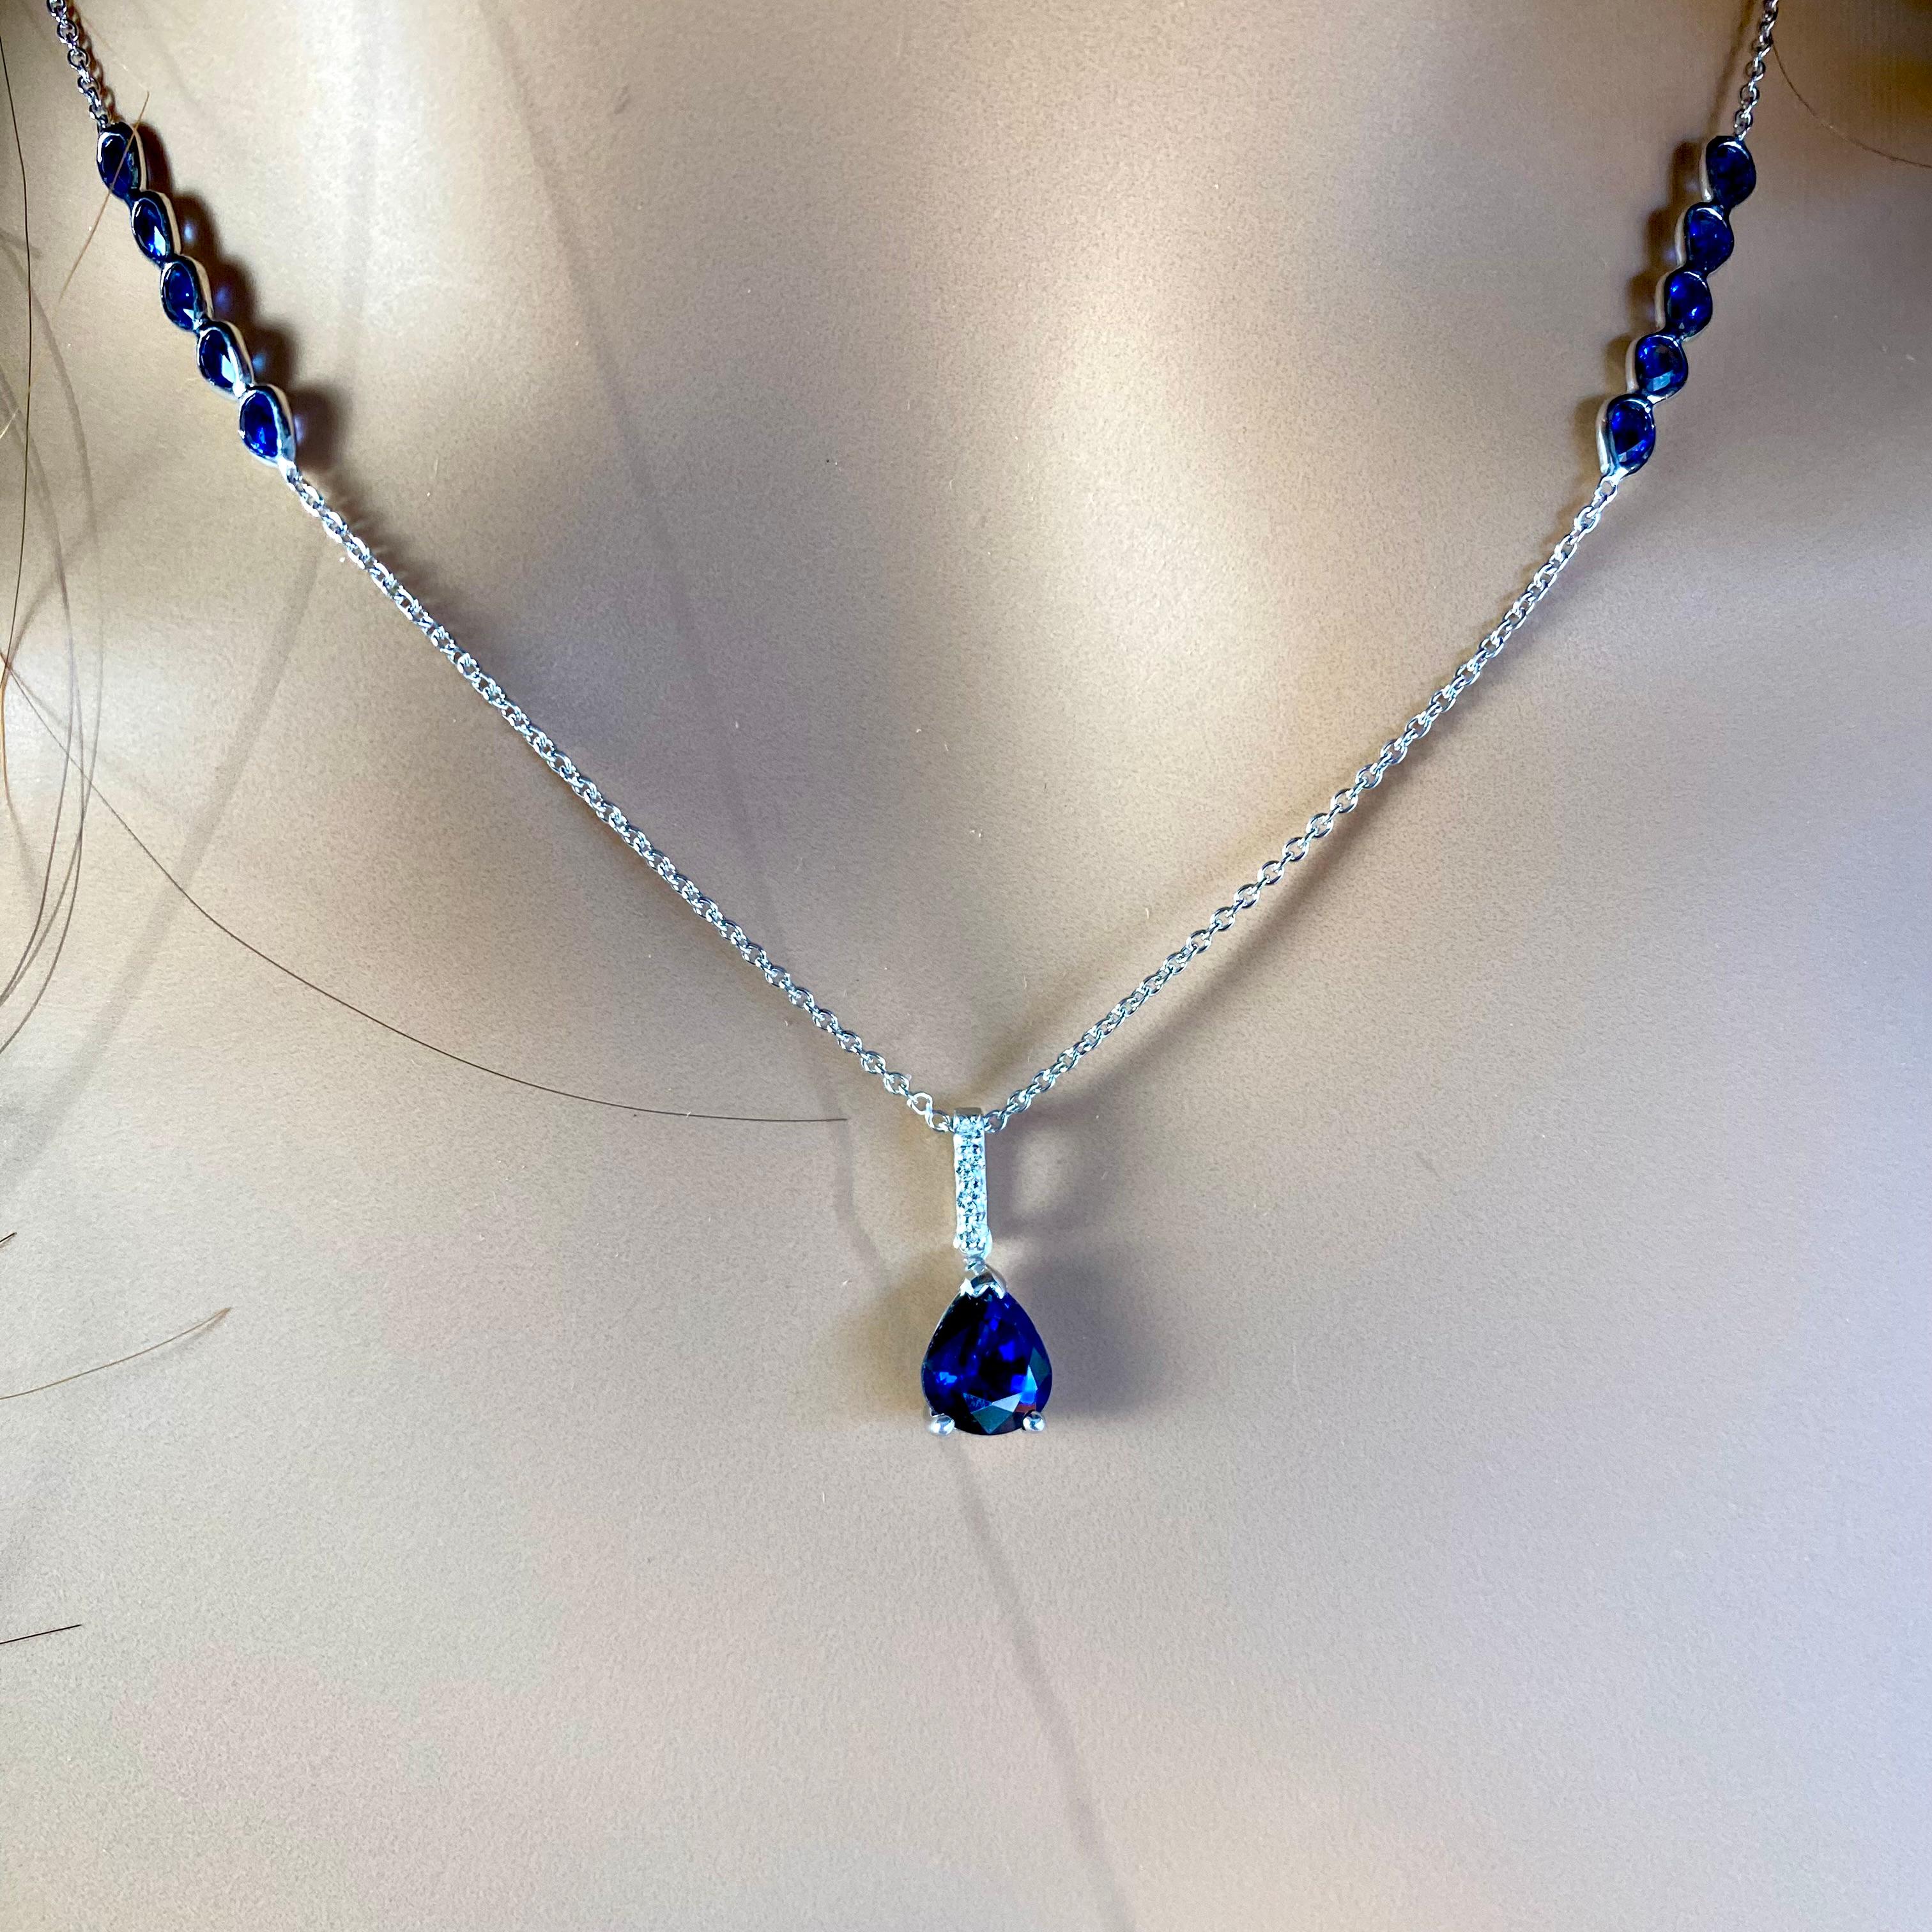 Pear Cut Eleven Pear Sapphires Diamonds 4.83 Carat White Gold 19.5 Inch Long Necklace For Sale